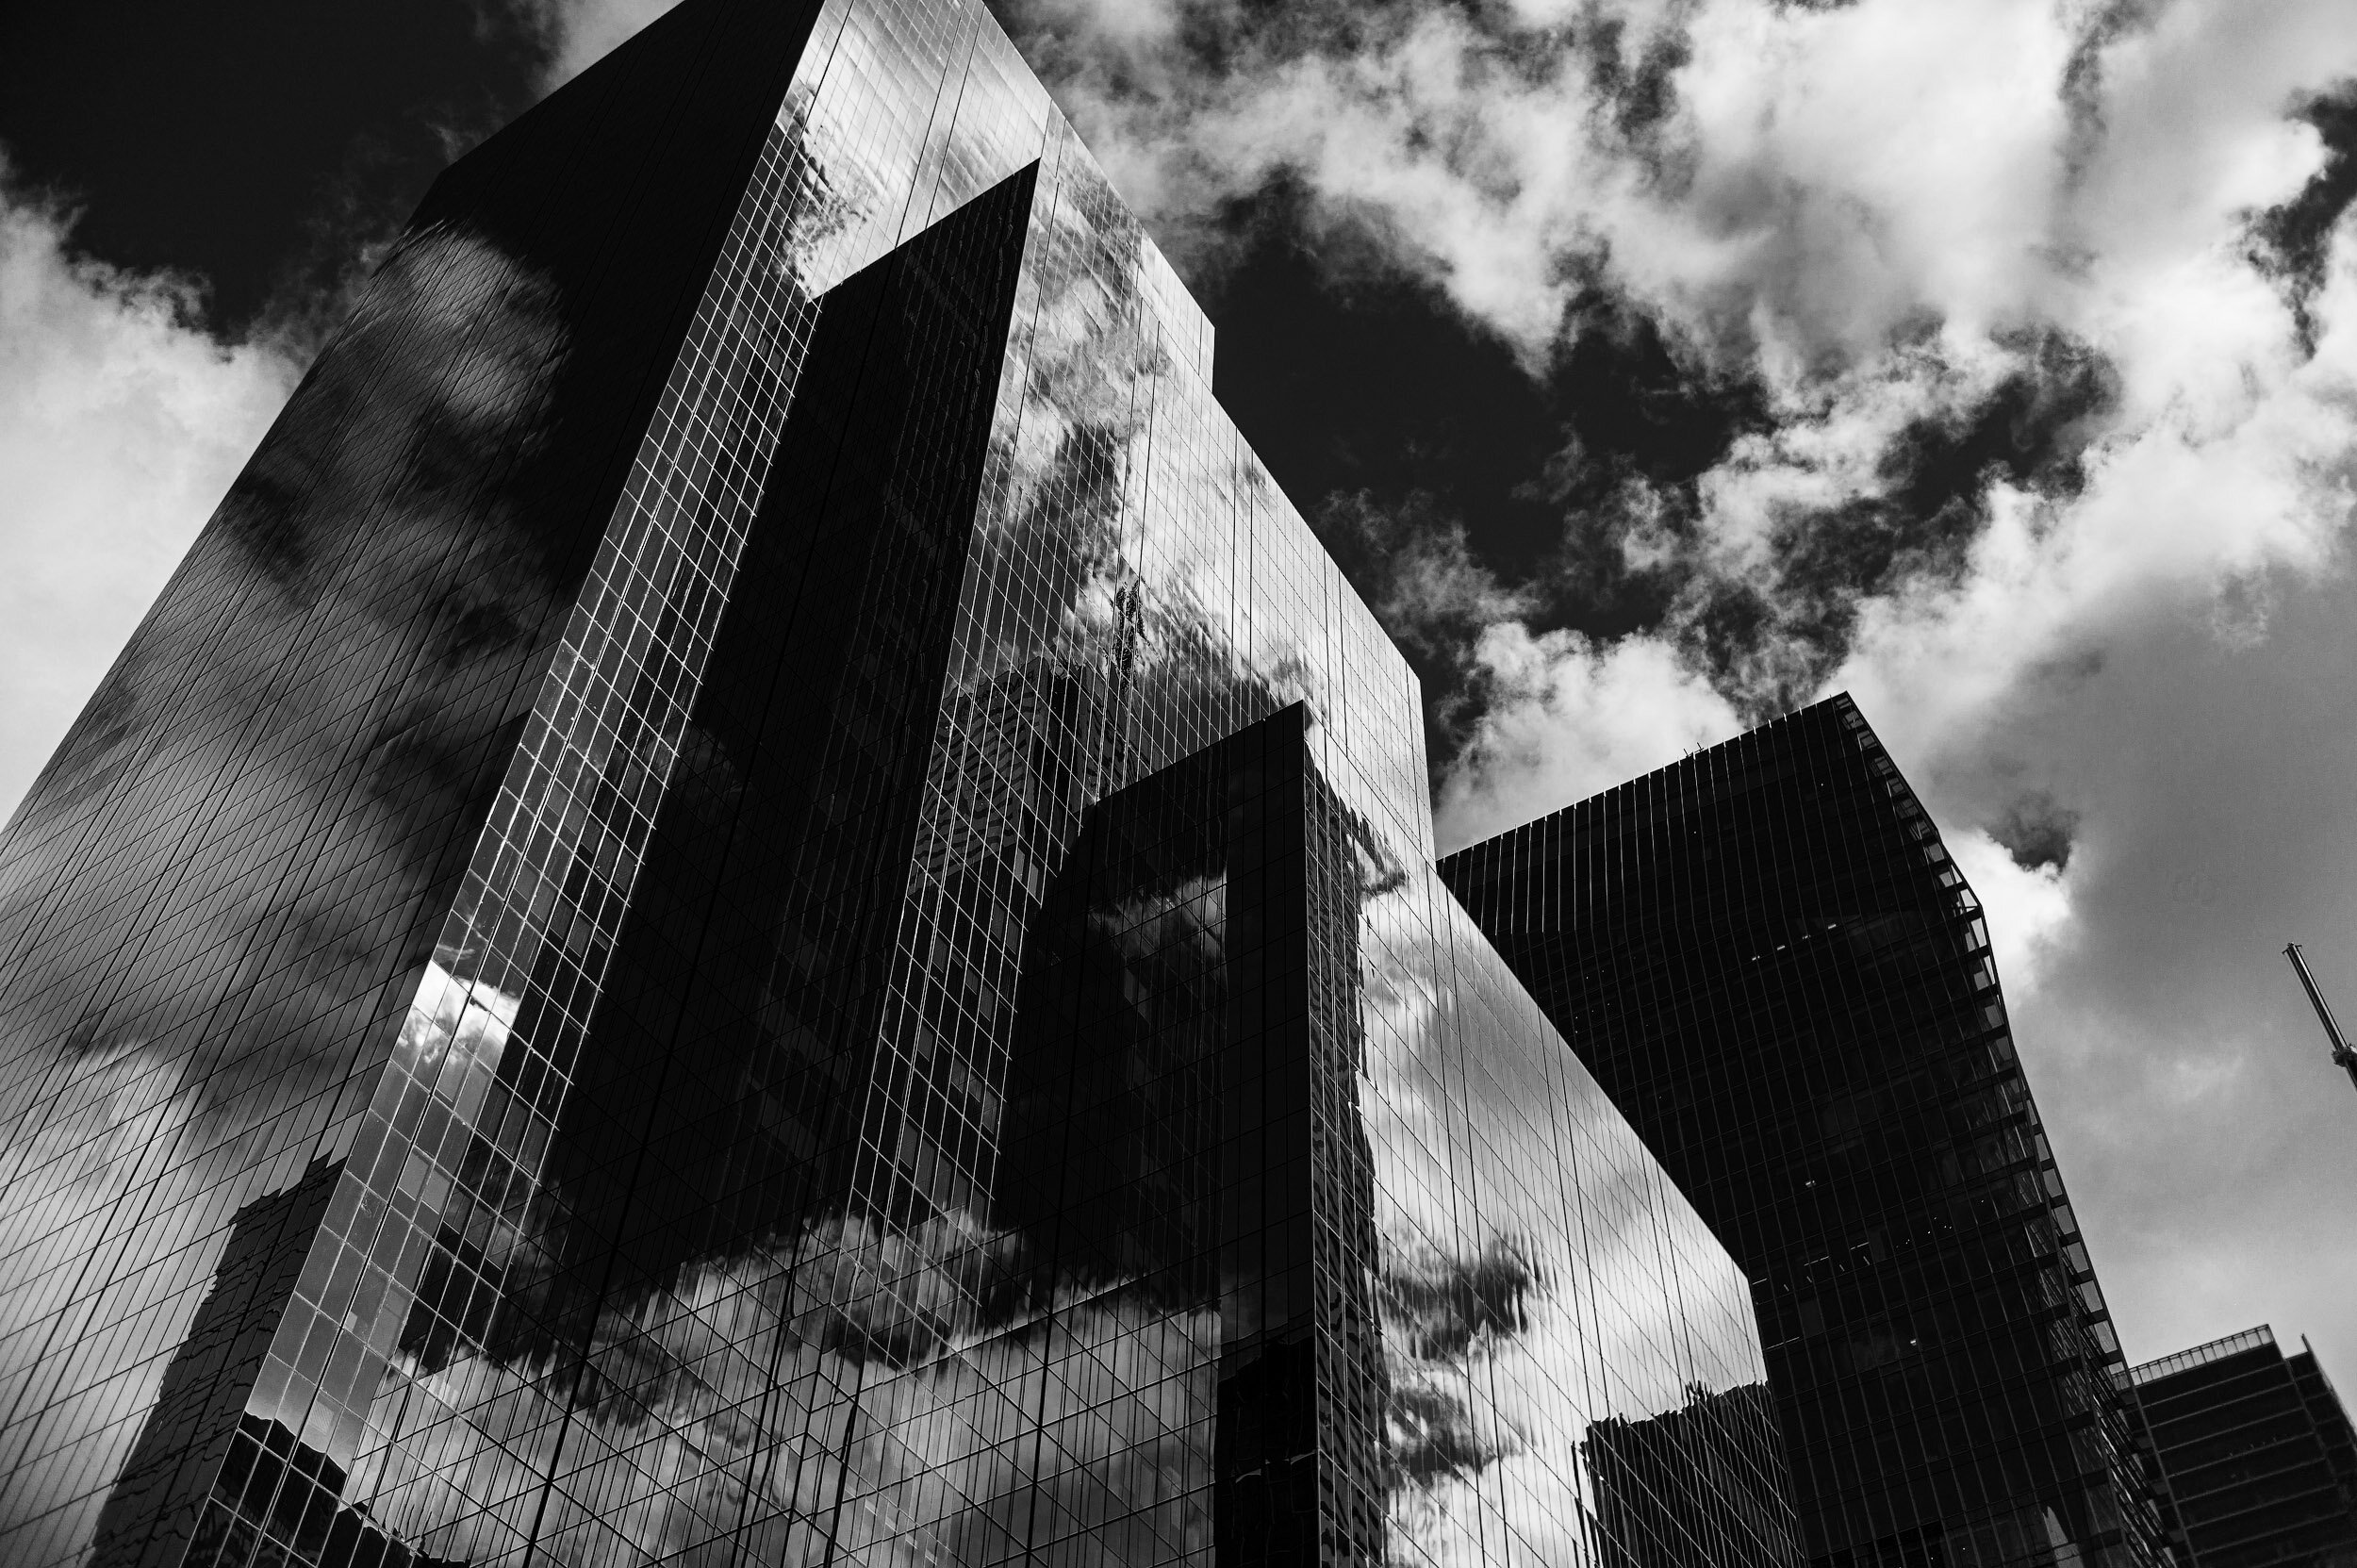  City of blinding clouds, also featured on the Leica LFI Master shot Gallery 